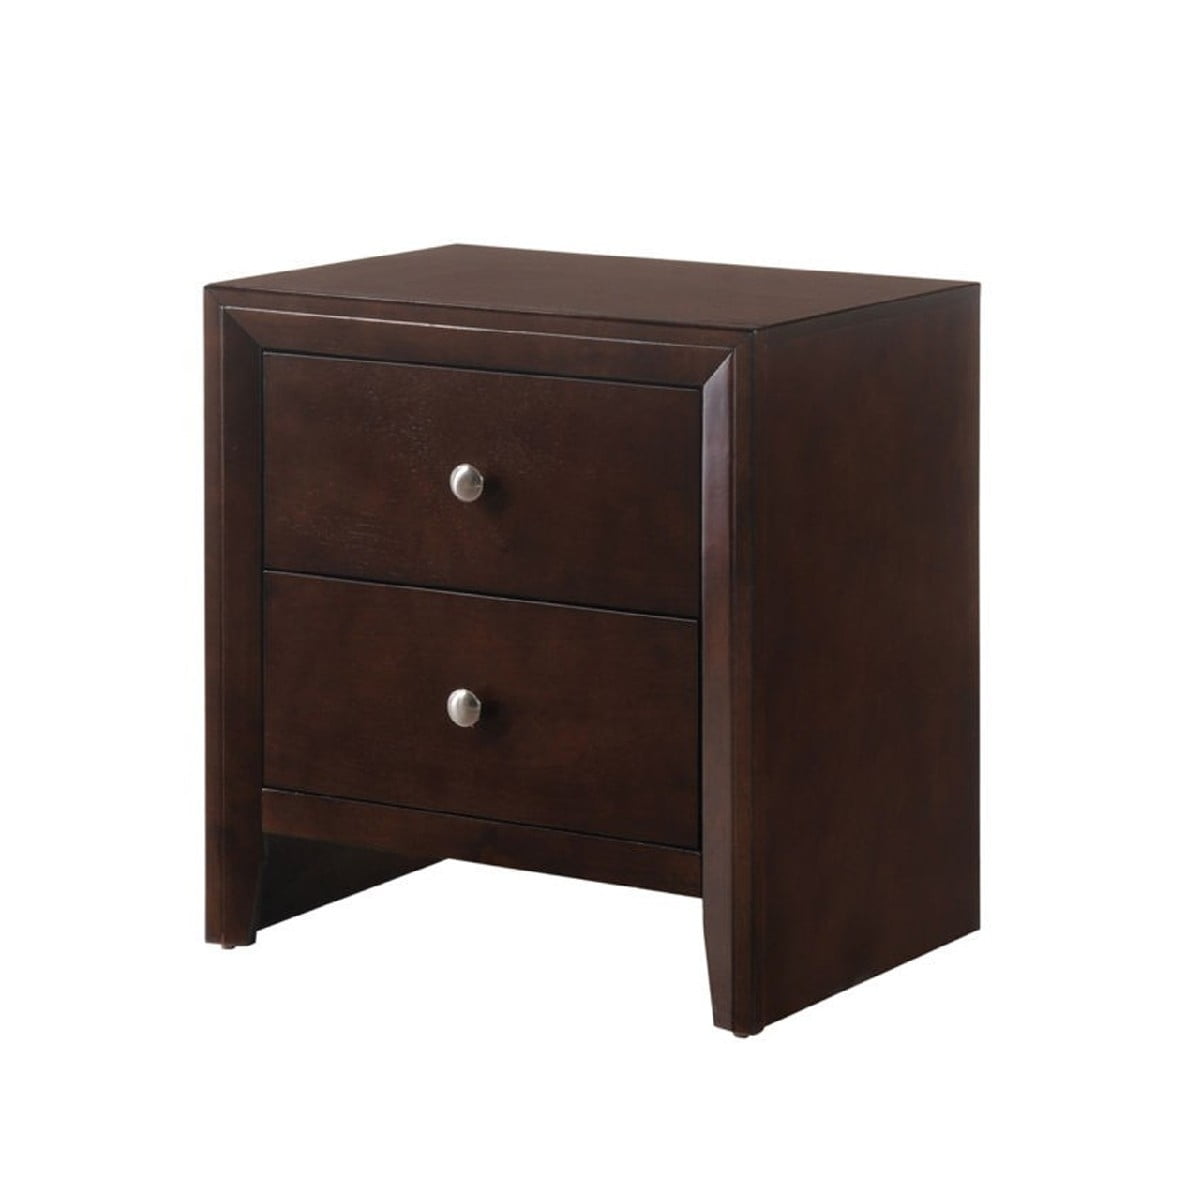 Picture of Benjara BM215227 Grained Wooden Nightstand with 2 Drawers & Sled Base - Cherry Brown - 23.7 x 16.5 x 22.3 in.